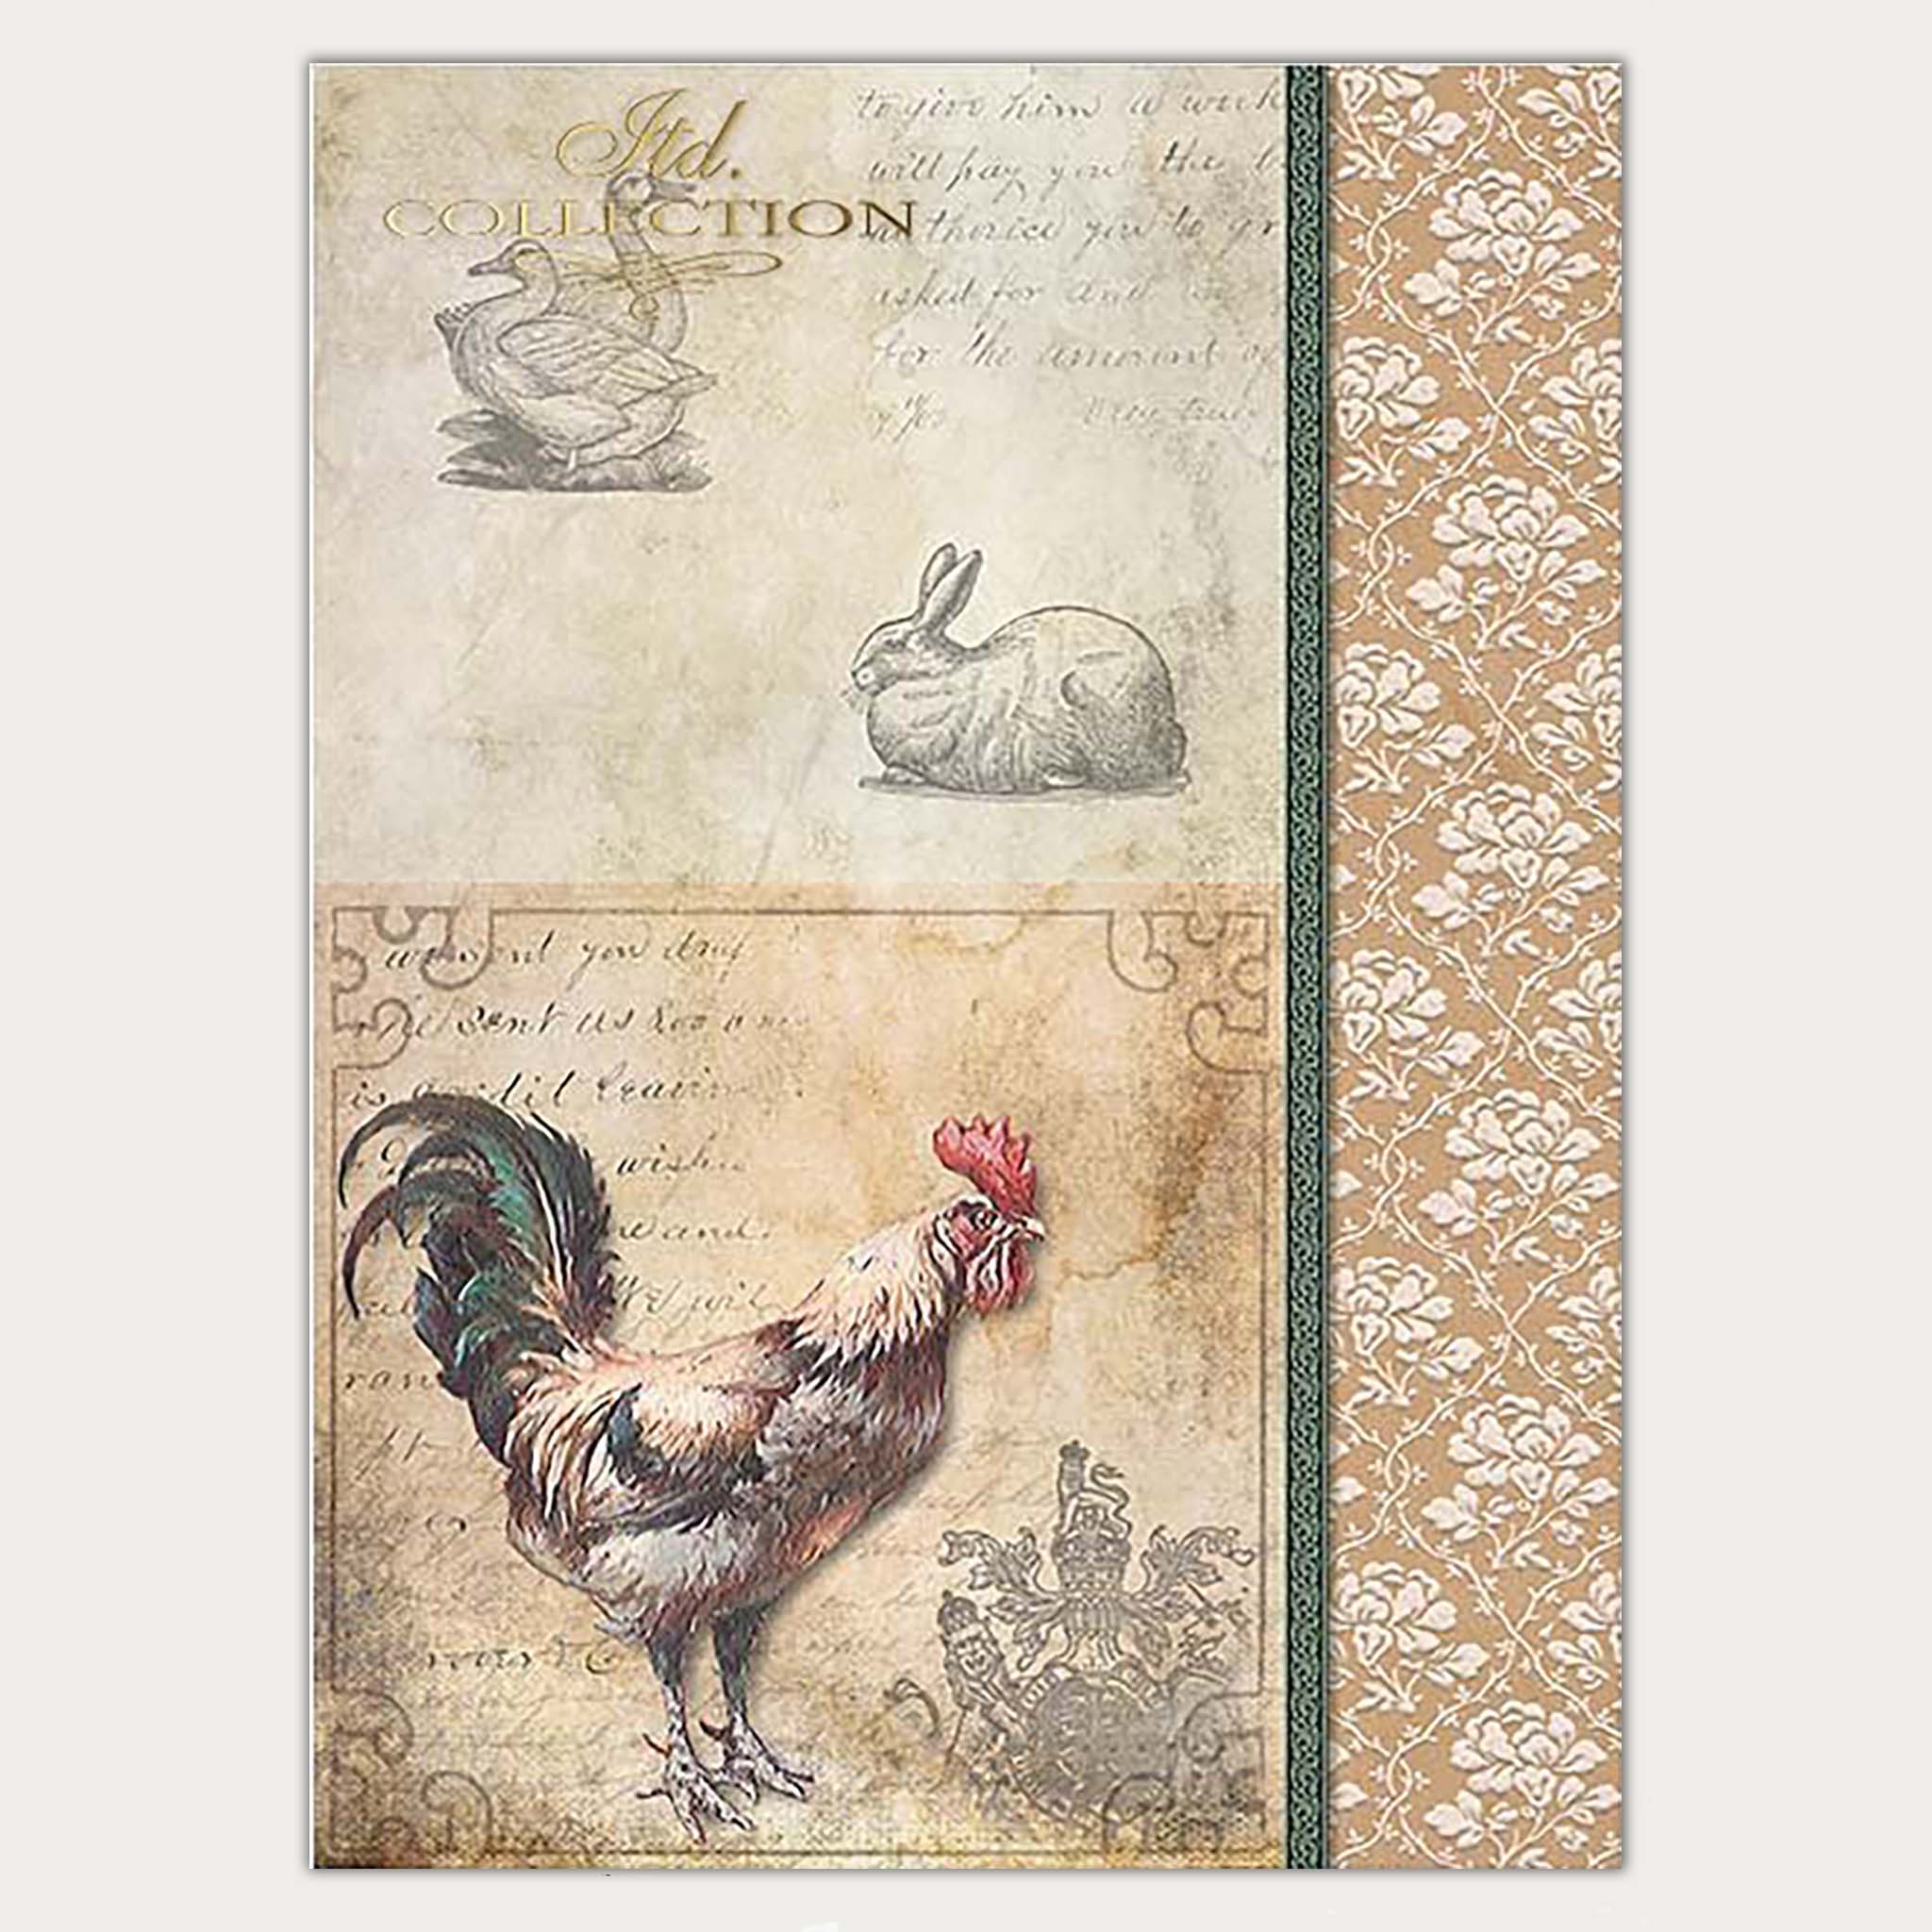 A4 rice paper design of vintage parchment that features a rooster on the lower half and ducks and a rabbit on the top half. On the right side of the design is a border with a repeating white floral design.